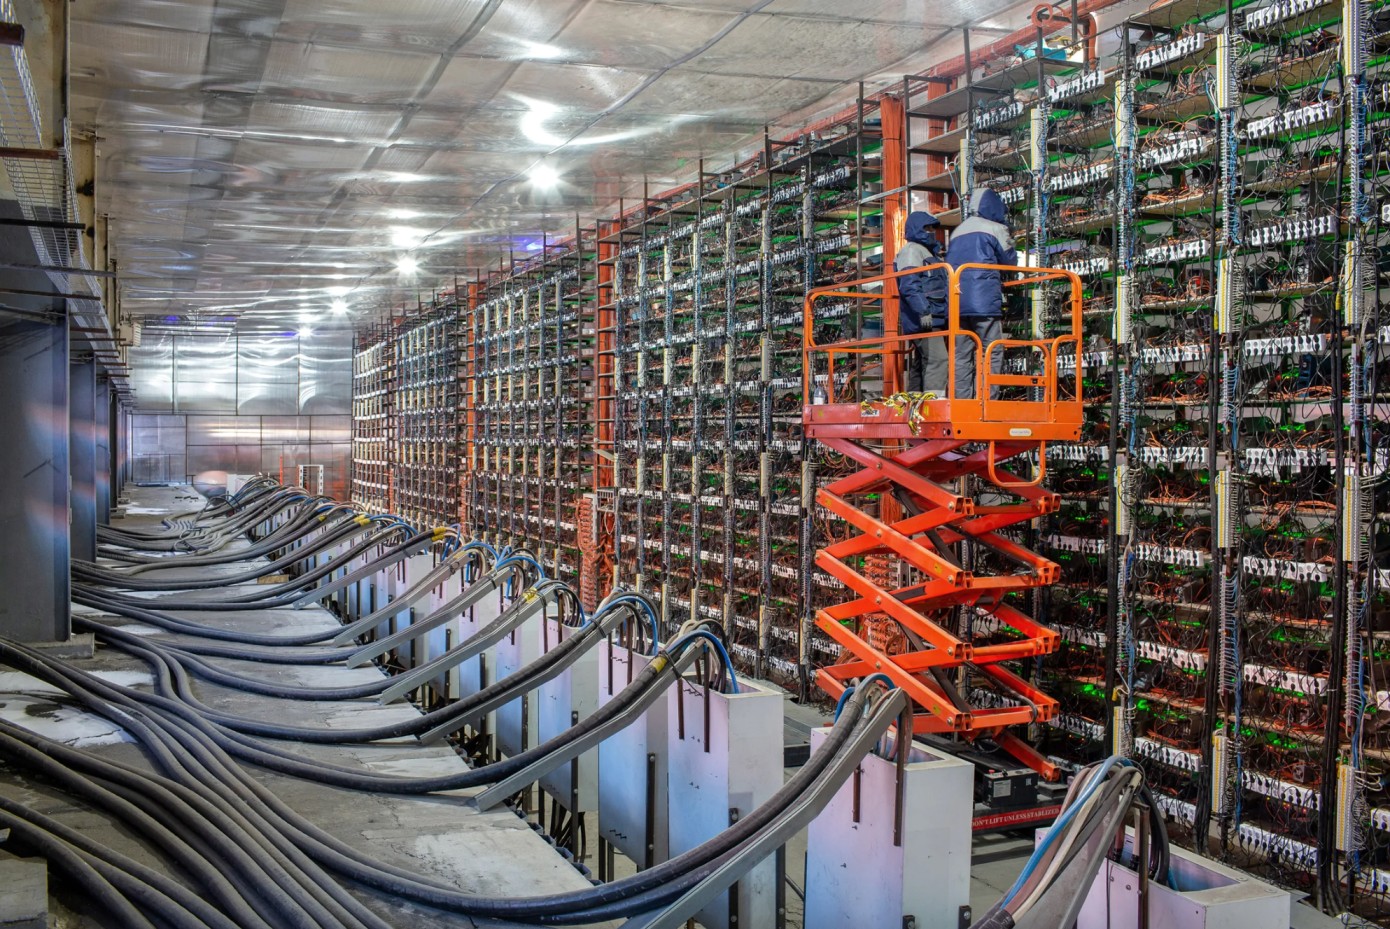 ‘ASIC Financing’ Is Driving Down Bitcoin Mining Profitability - CoinDesk